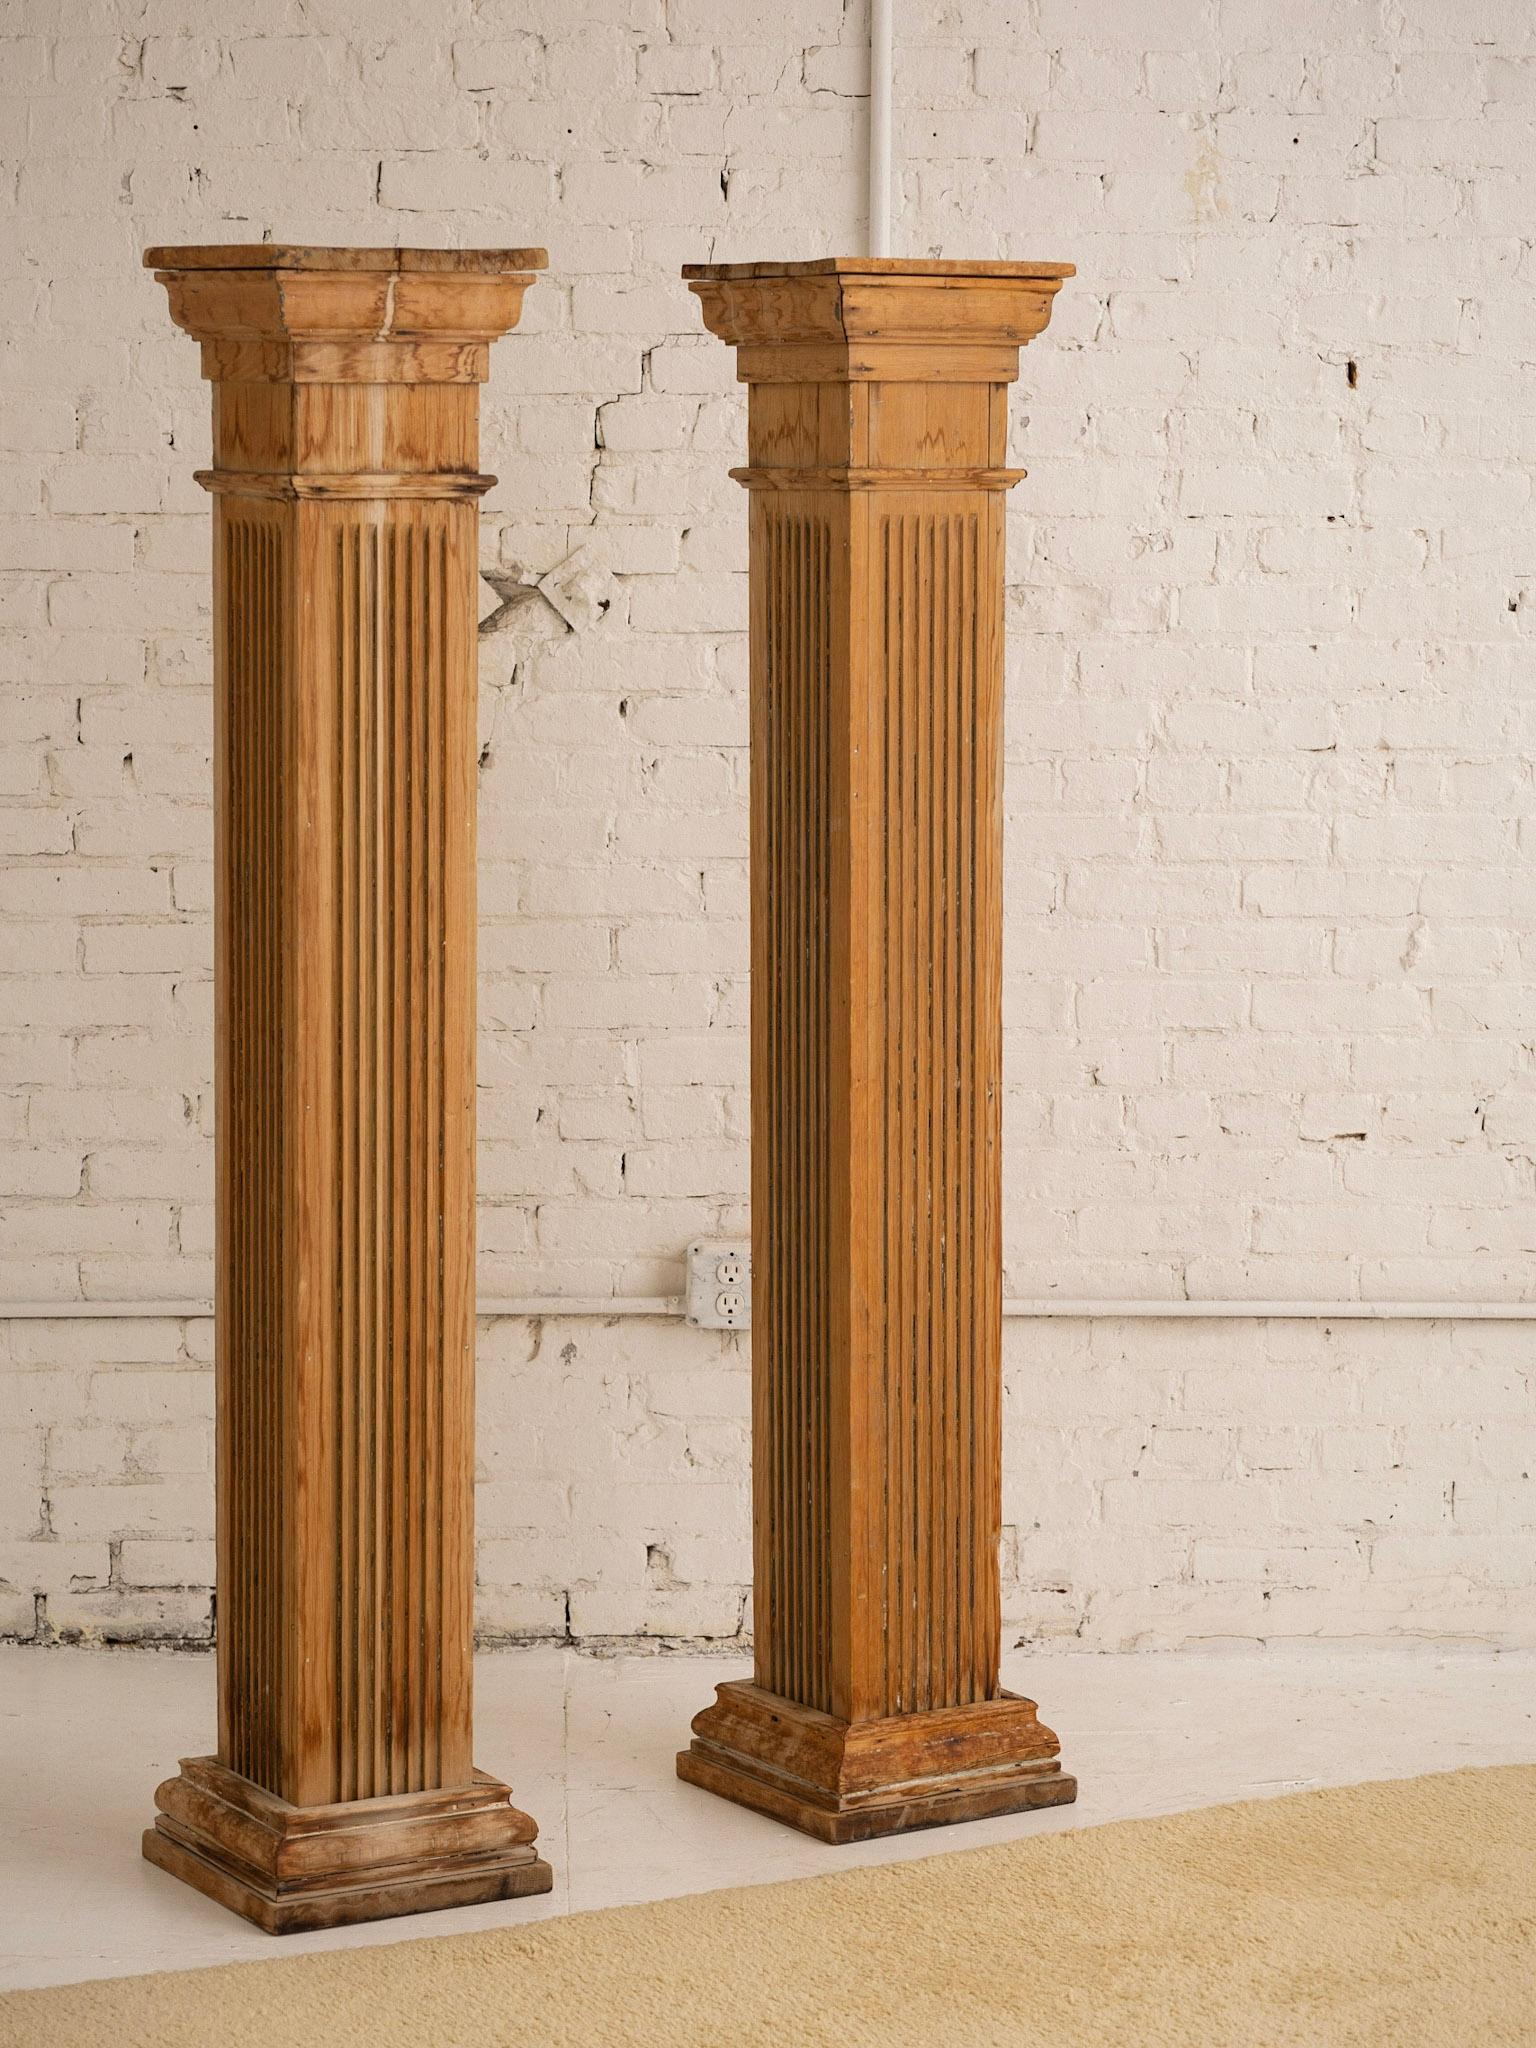 A pair of free standing antique salvaged architectural columns. Greco-Roman doric style. Square silhouette. Original paint has been removed to show a richly patinaed wood.